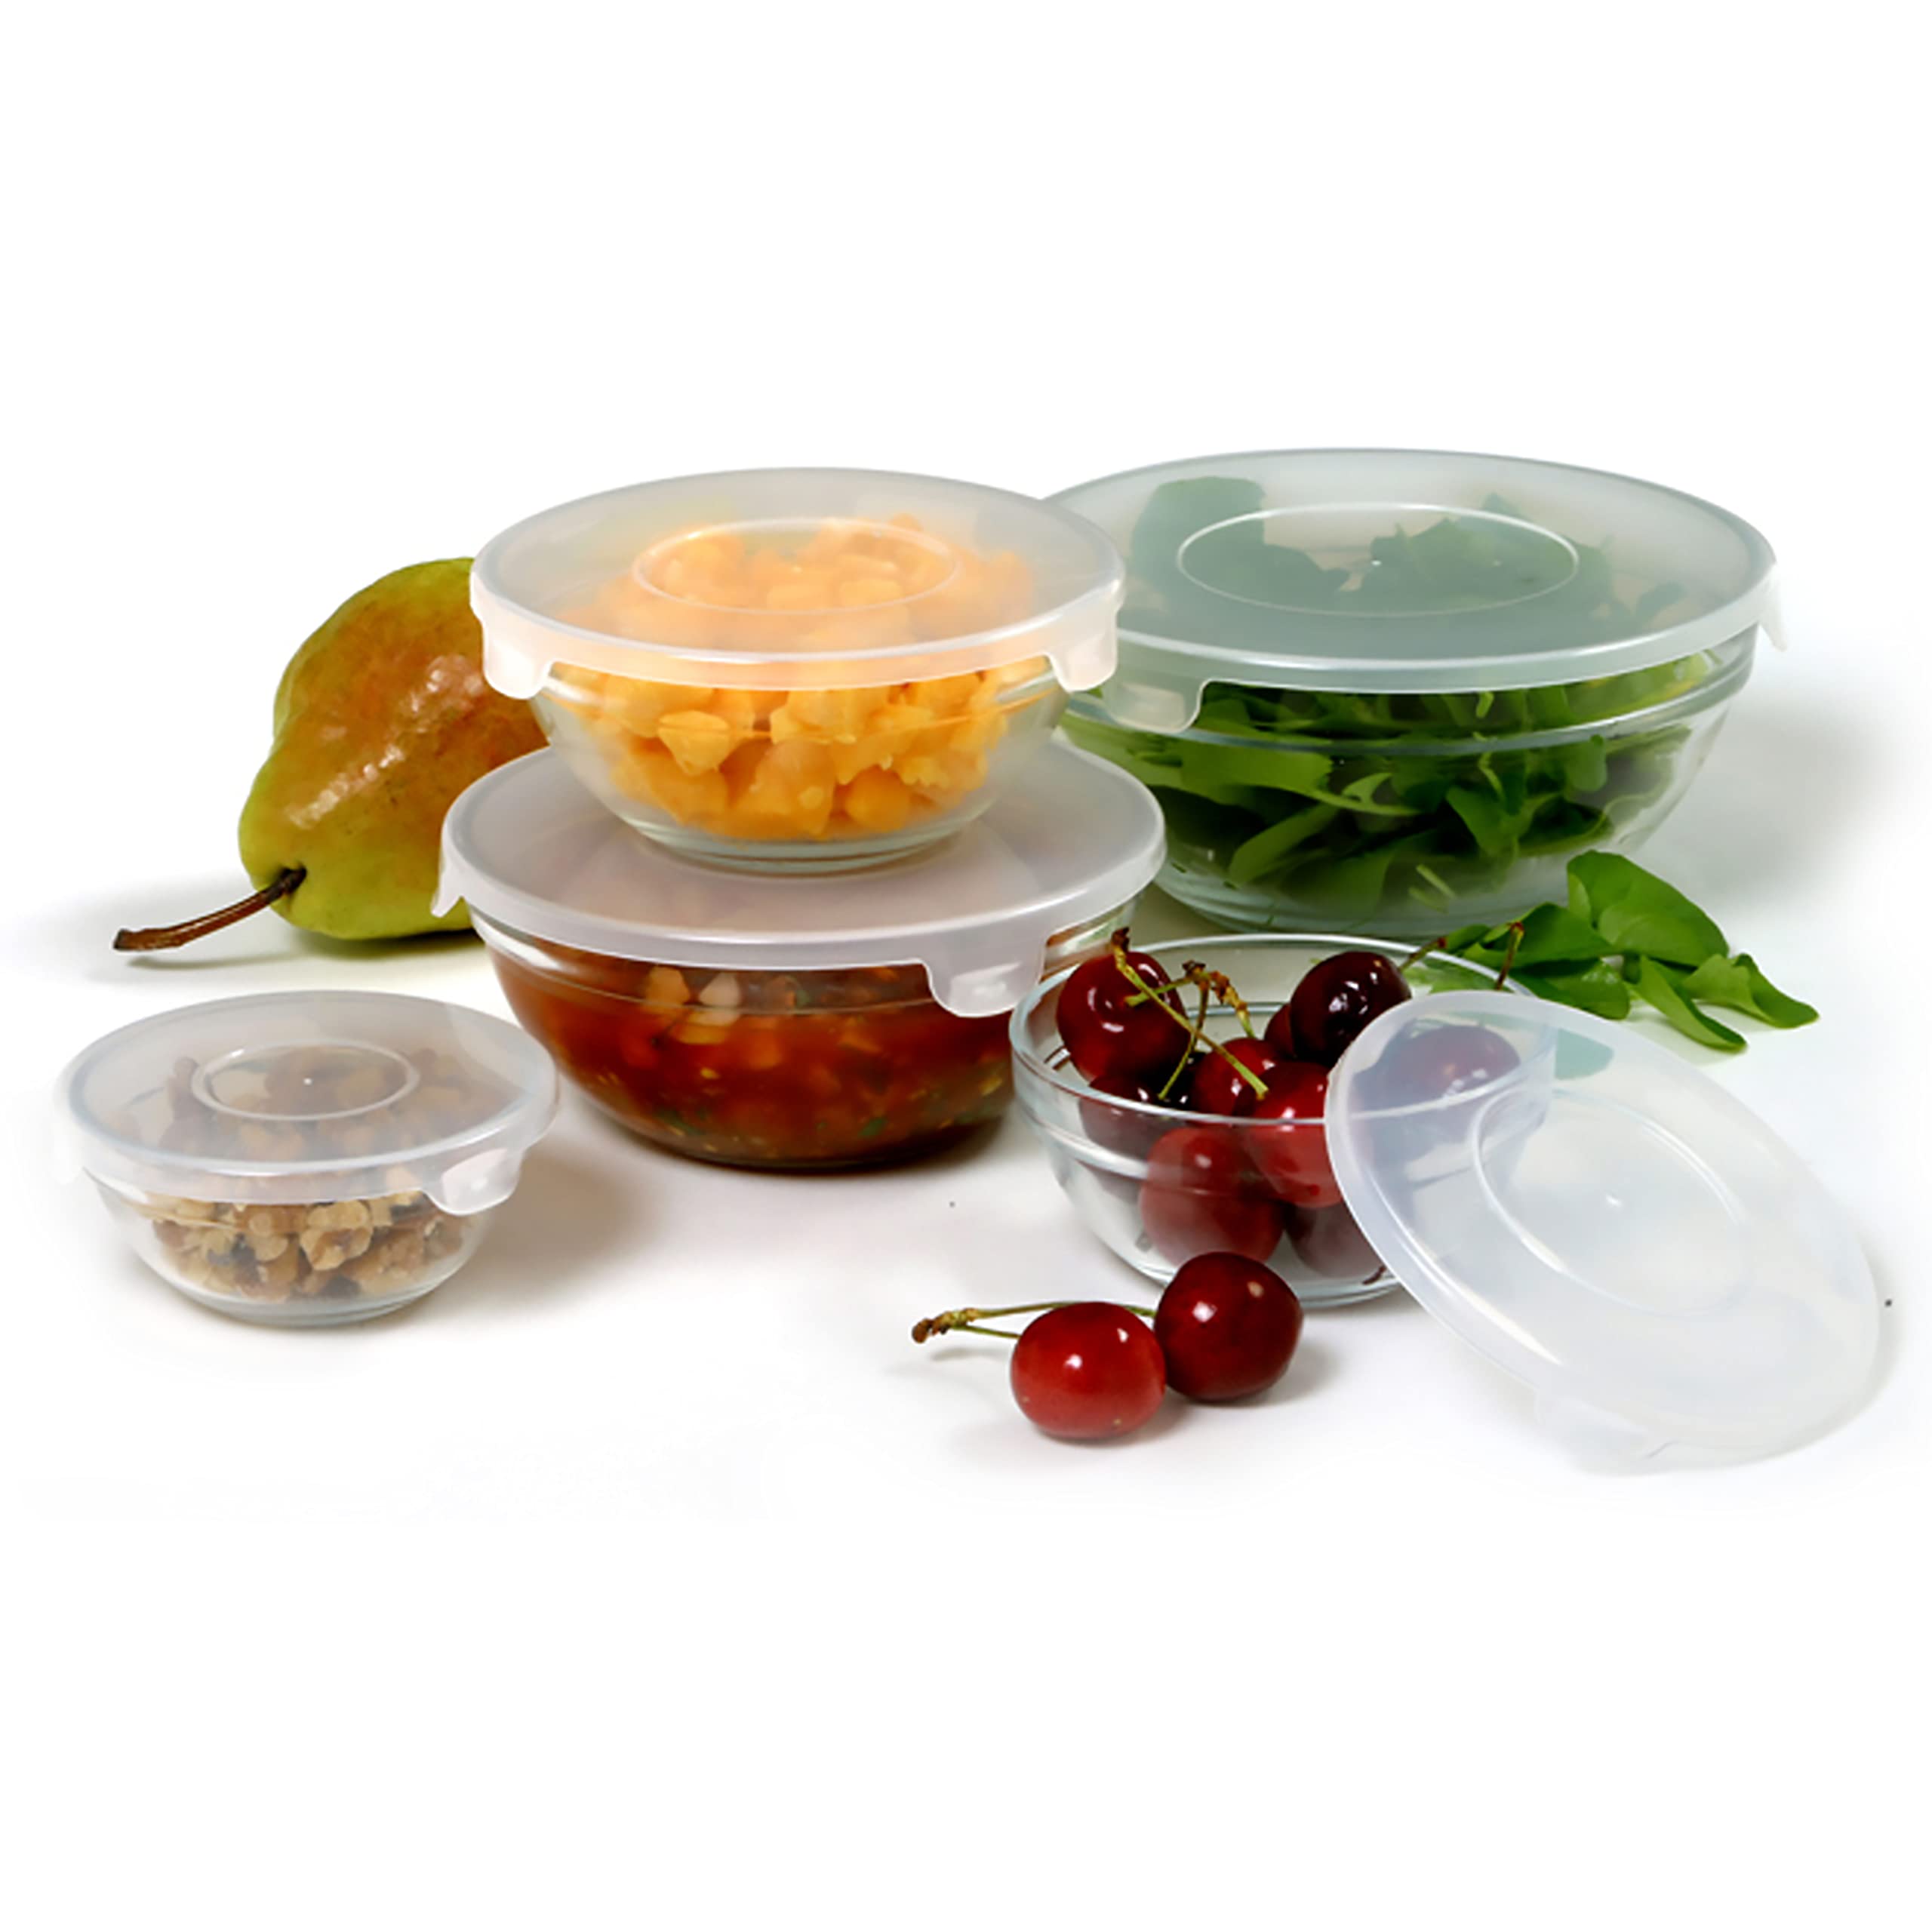 Norpro 10-Piece Nesting Glass Mixing/Storage Bowls with Lids